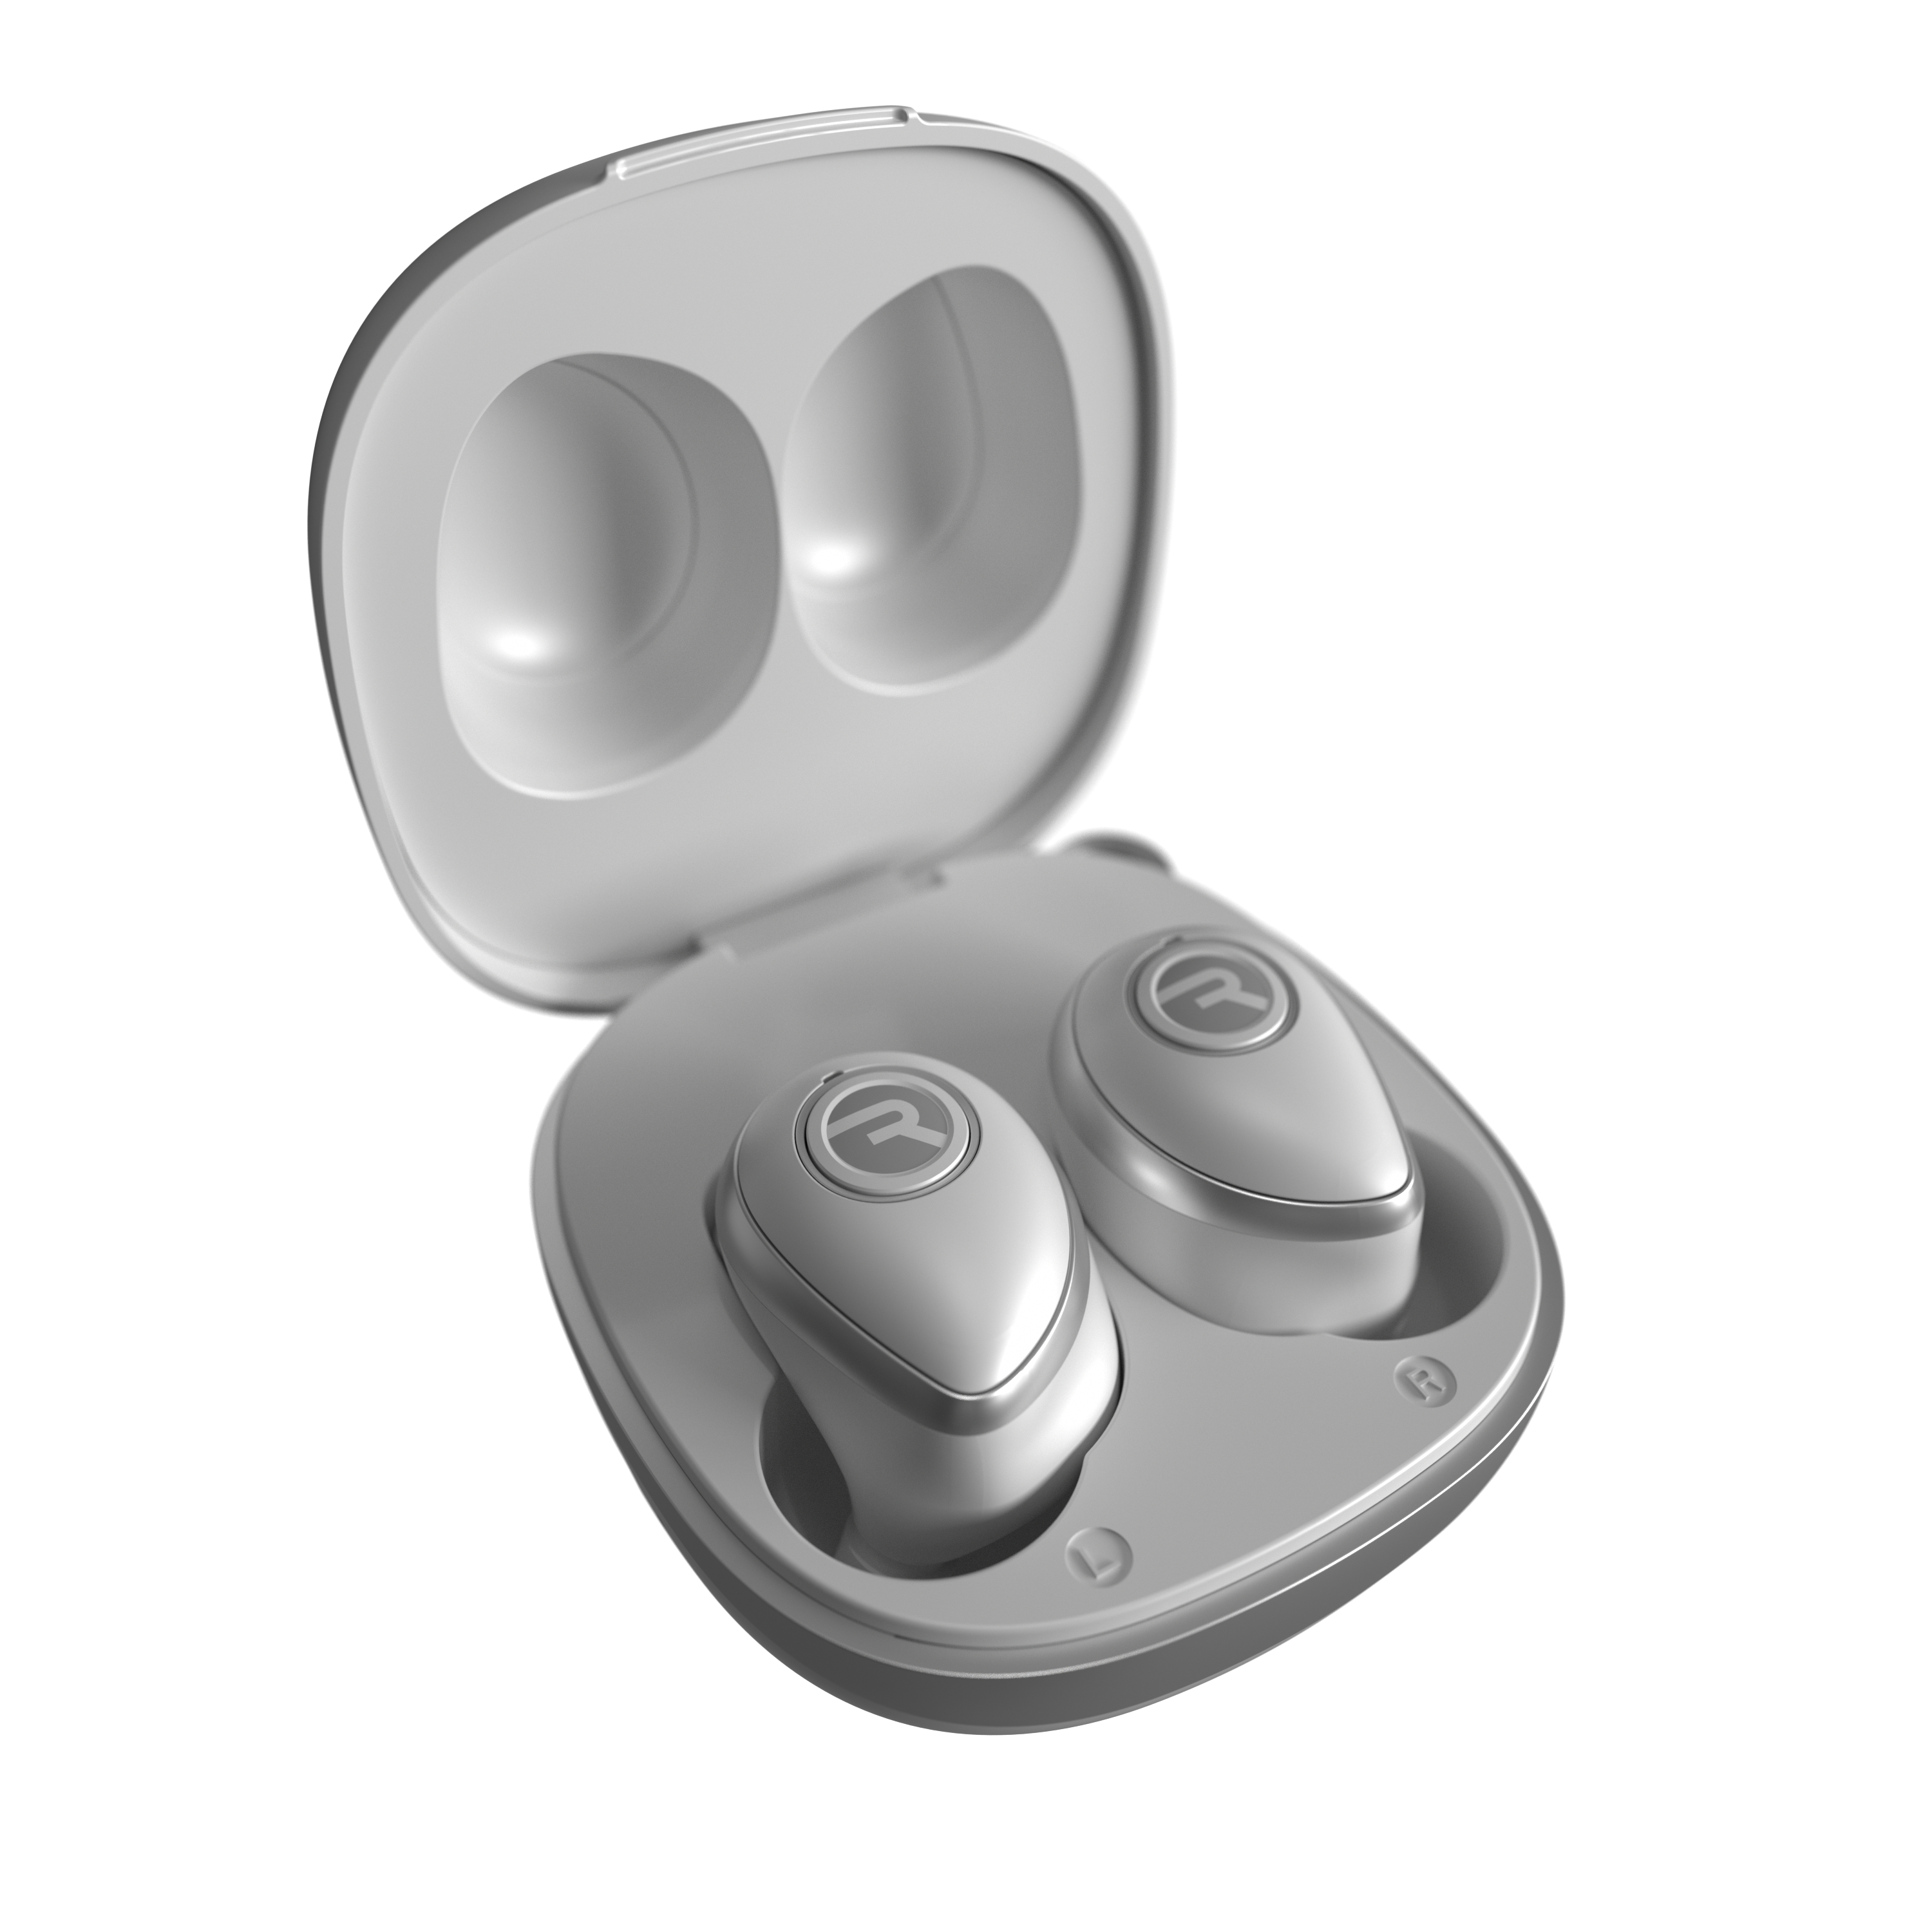 Raycon RBE755-WHIT E55 The Performer True Wireless Bluetooth Earbuds, White